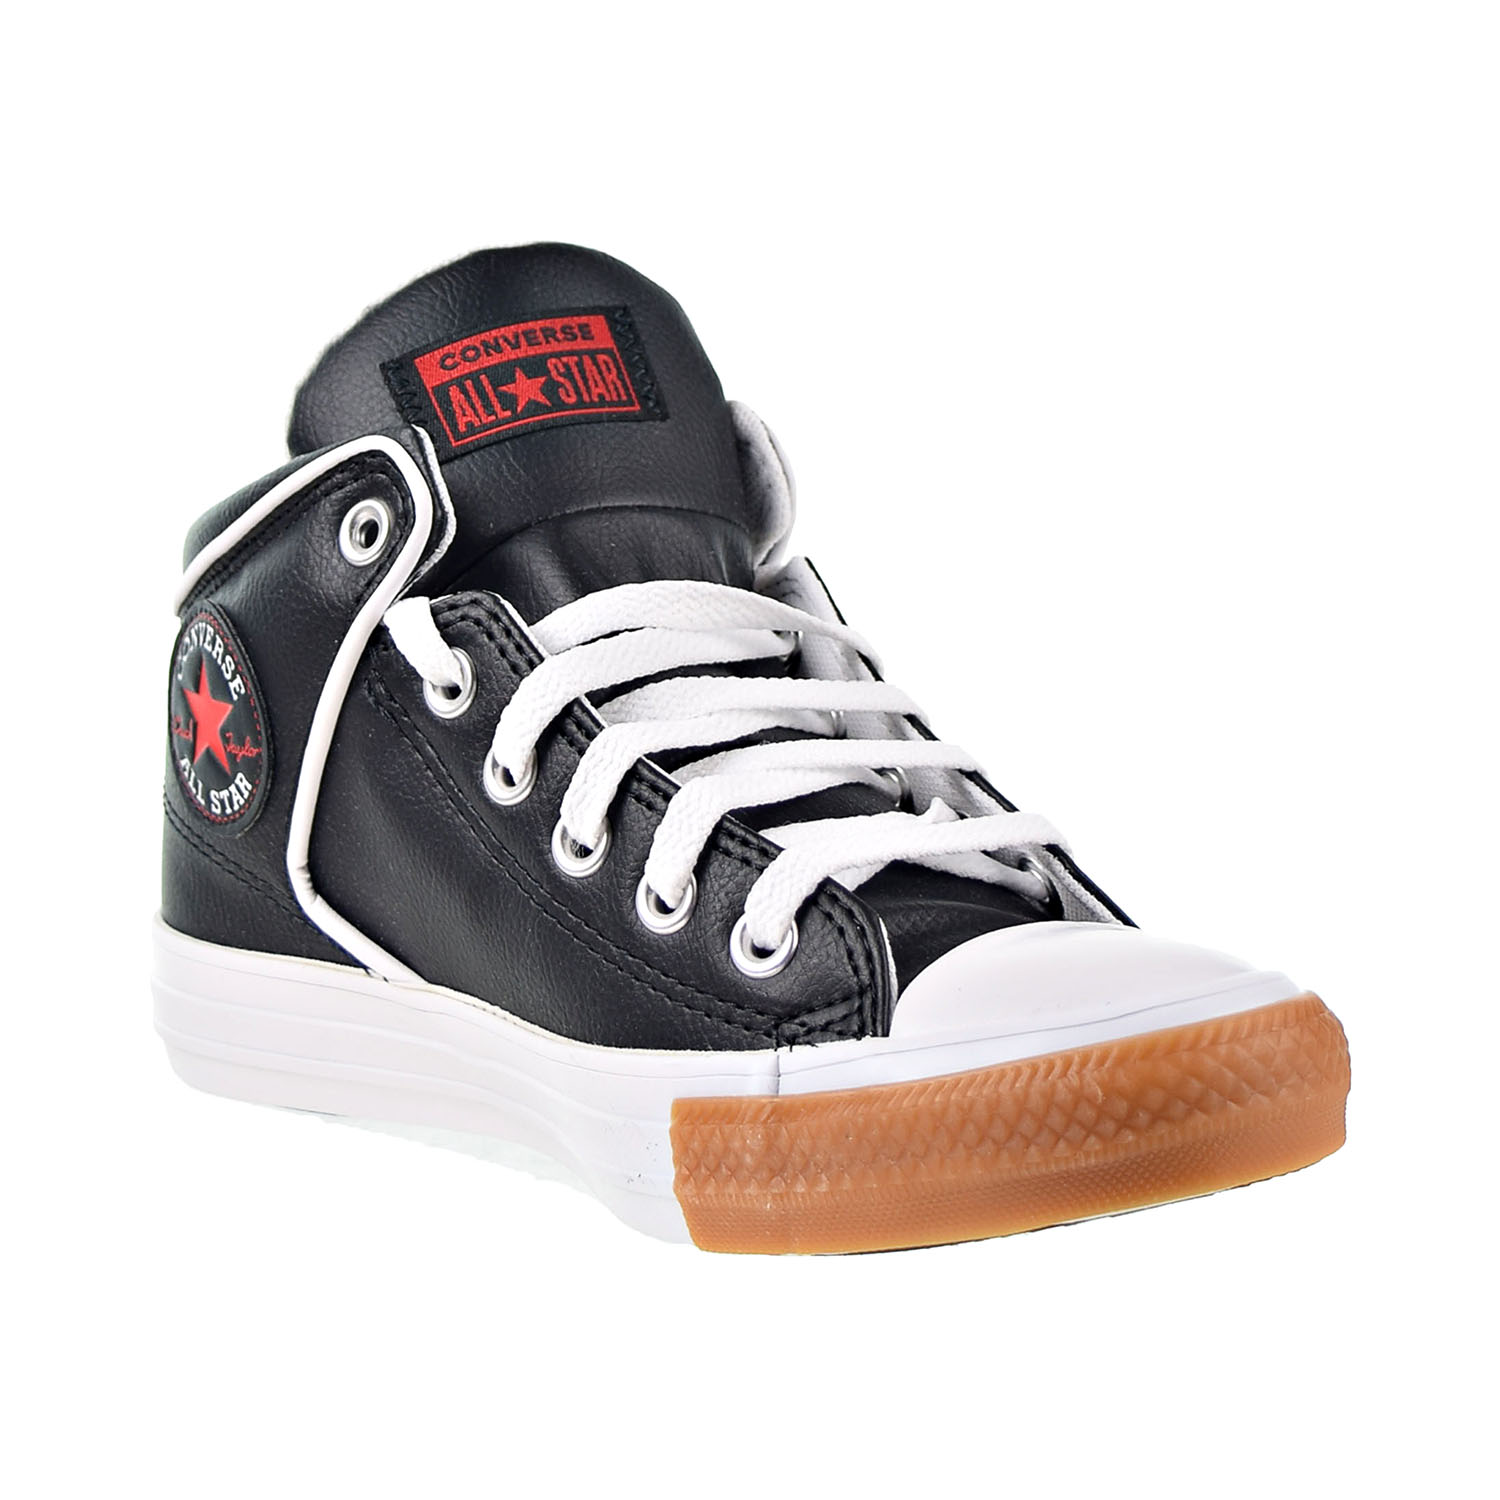 Volcano Earn curve Converse Chuck Taylor All Star Street Men's Shoes Black-University Red  168720c